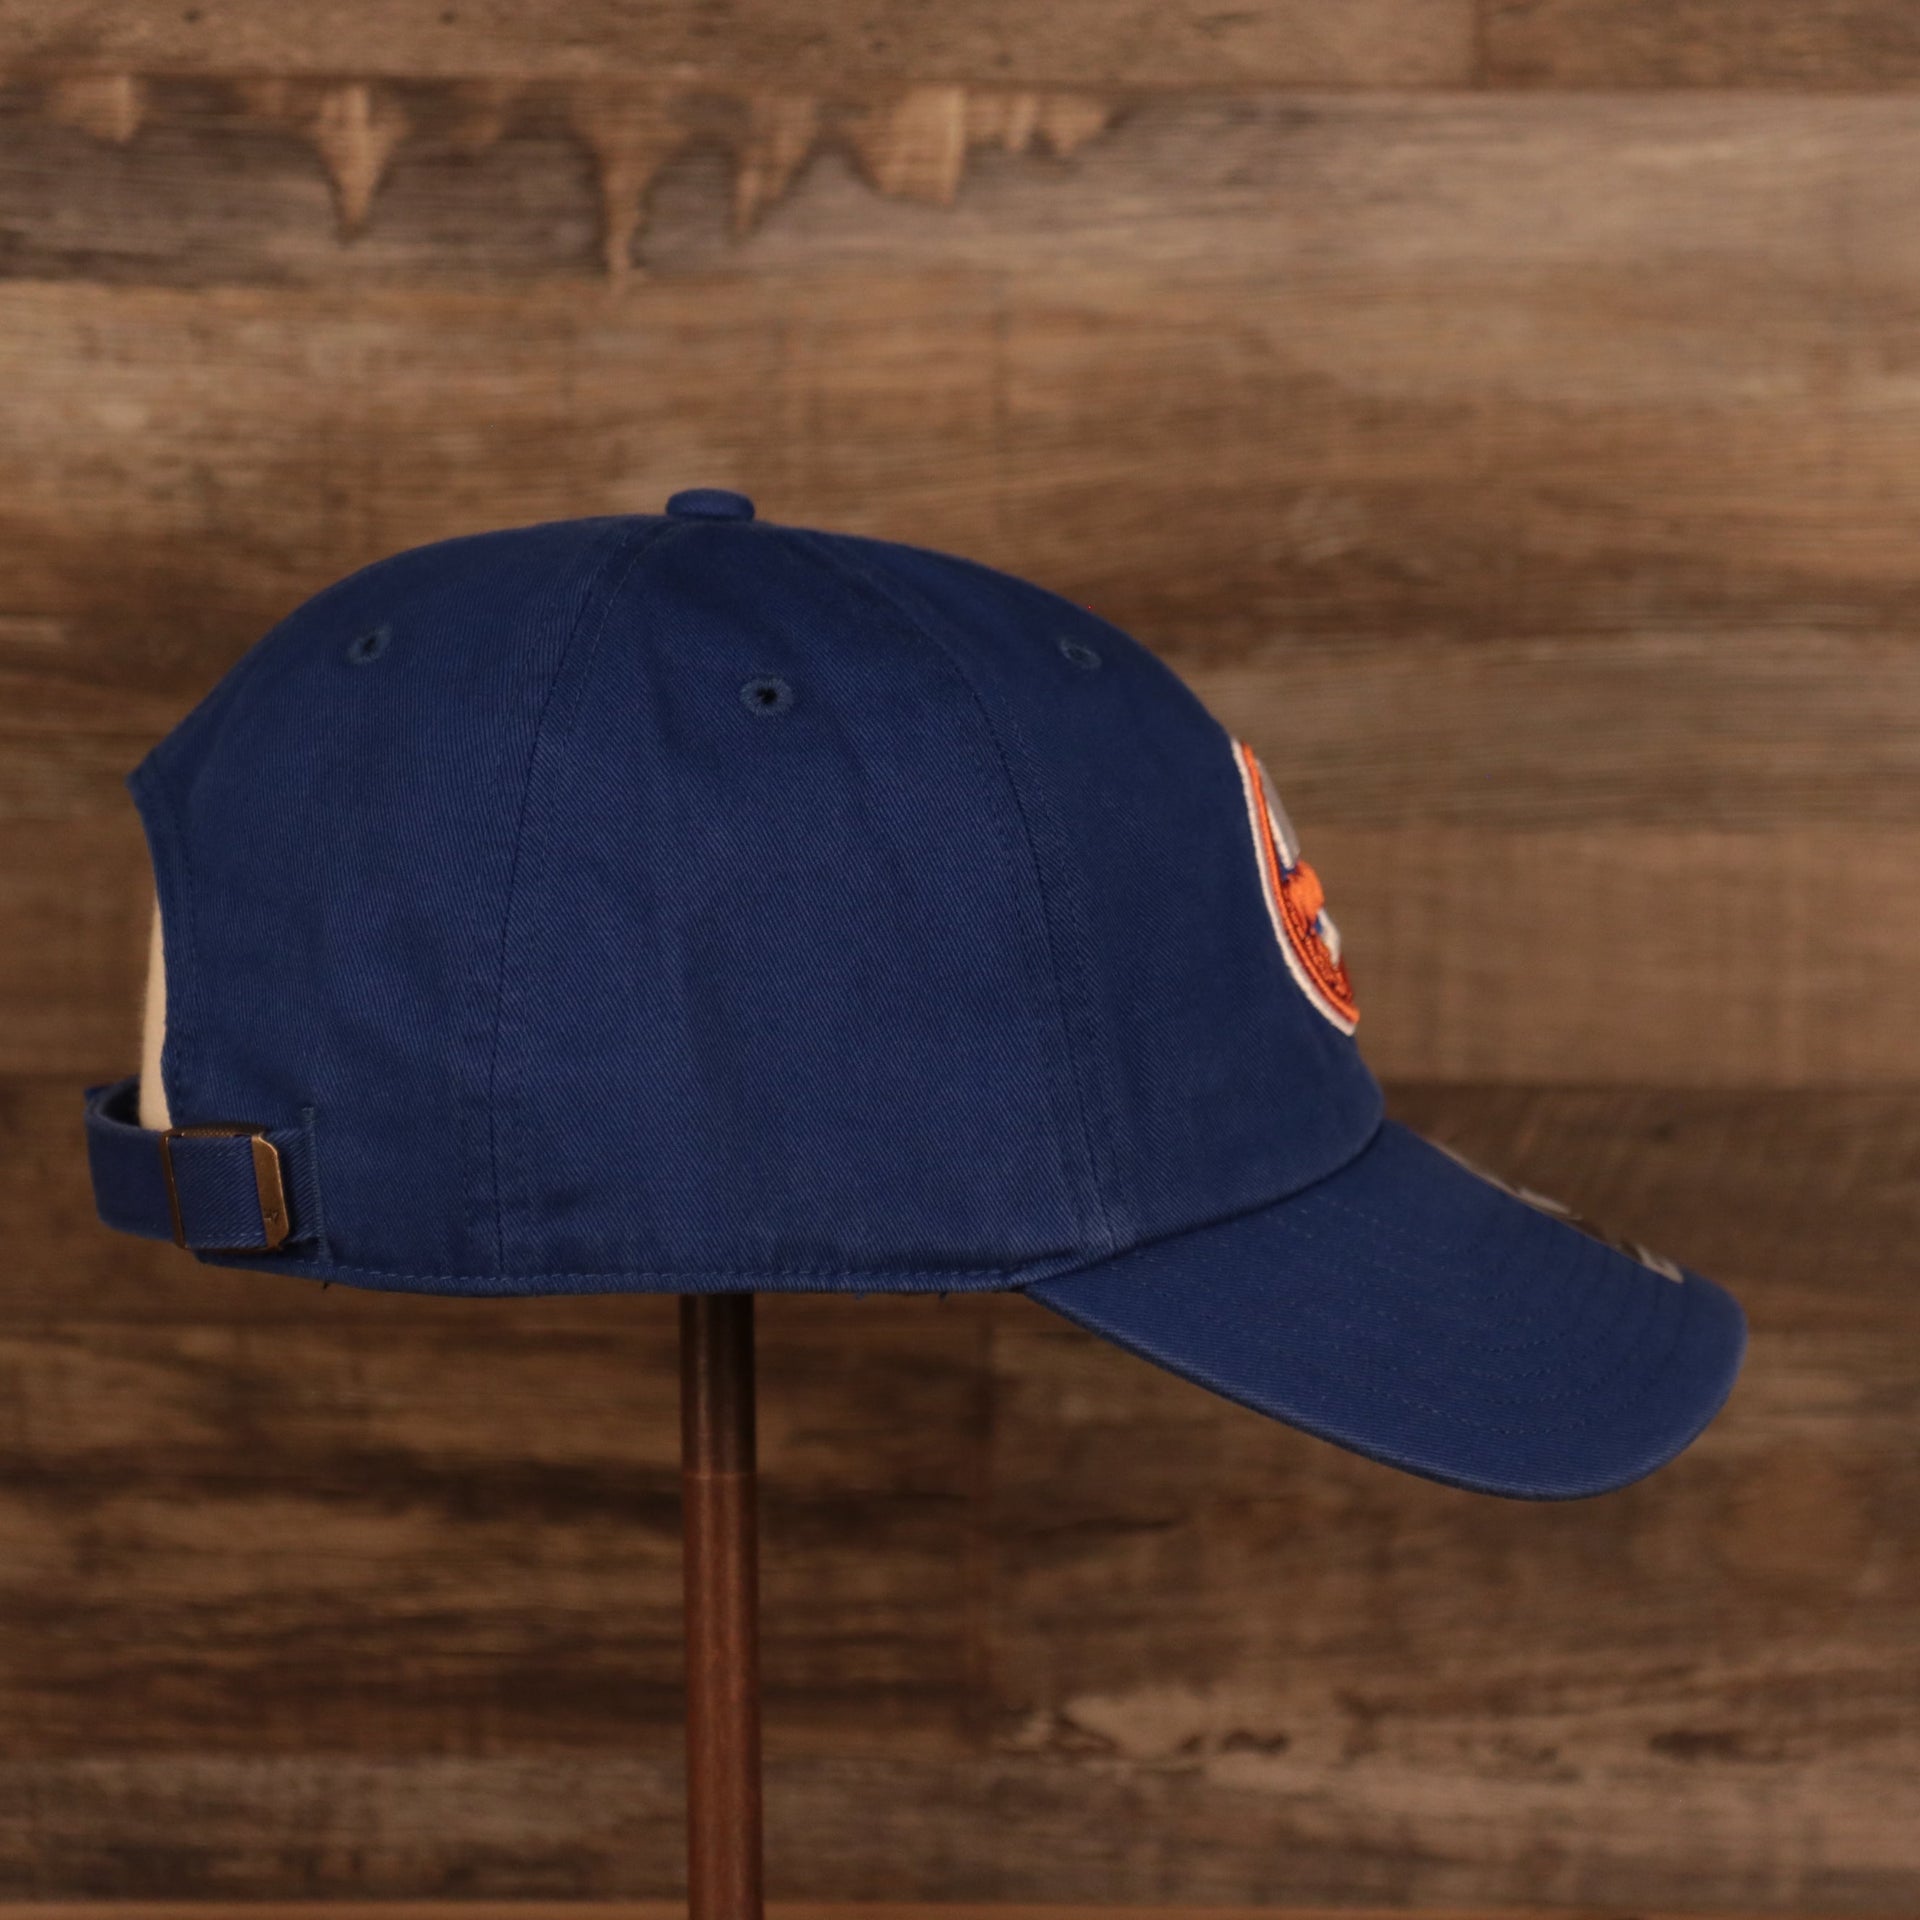 wearers right side of the New York Islanders Royal Blue Adjustable Dad Hat